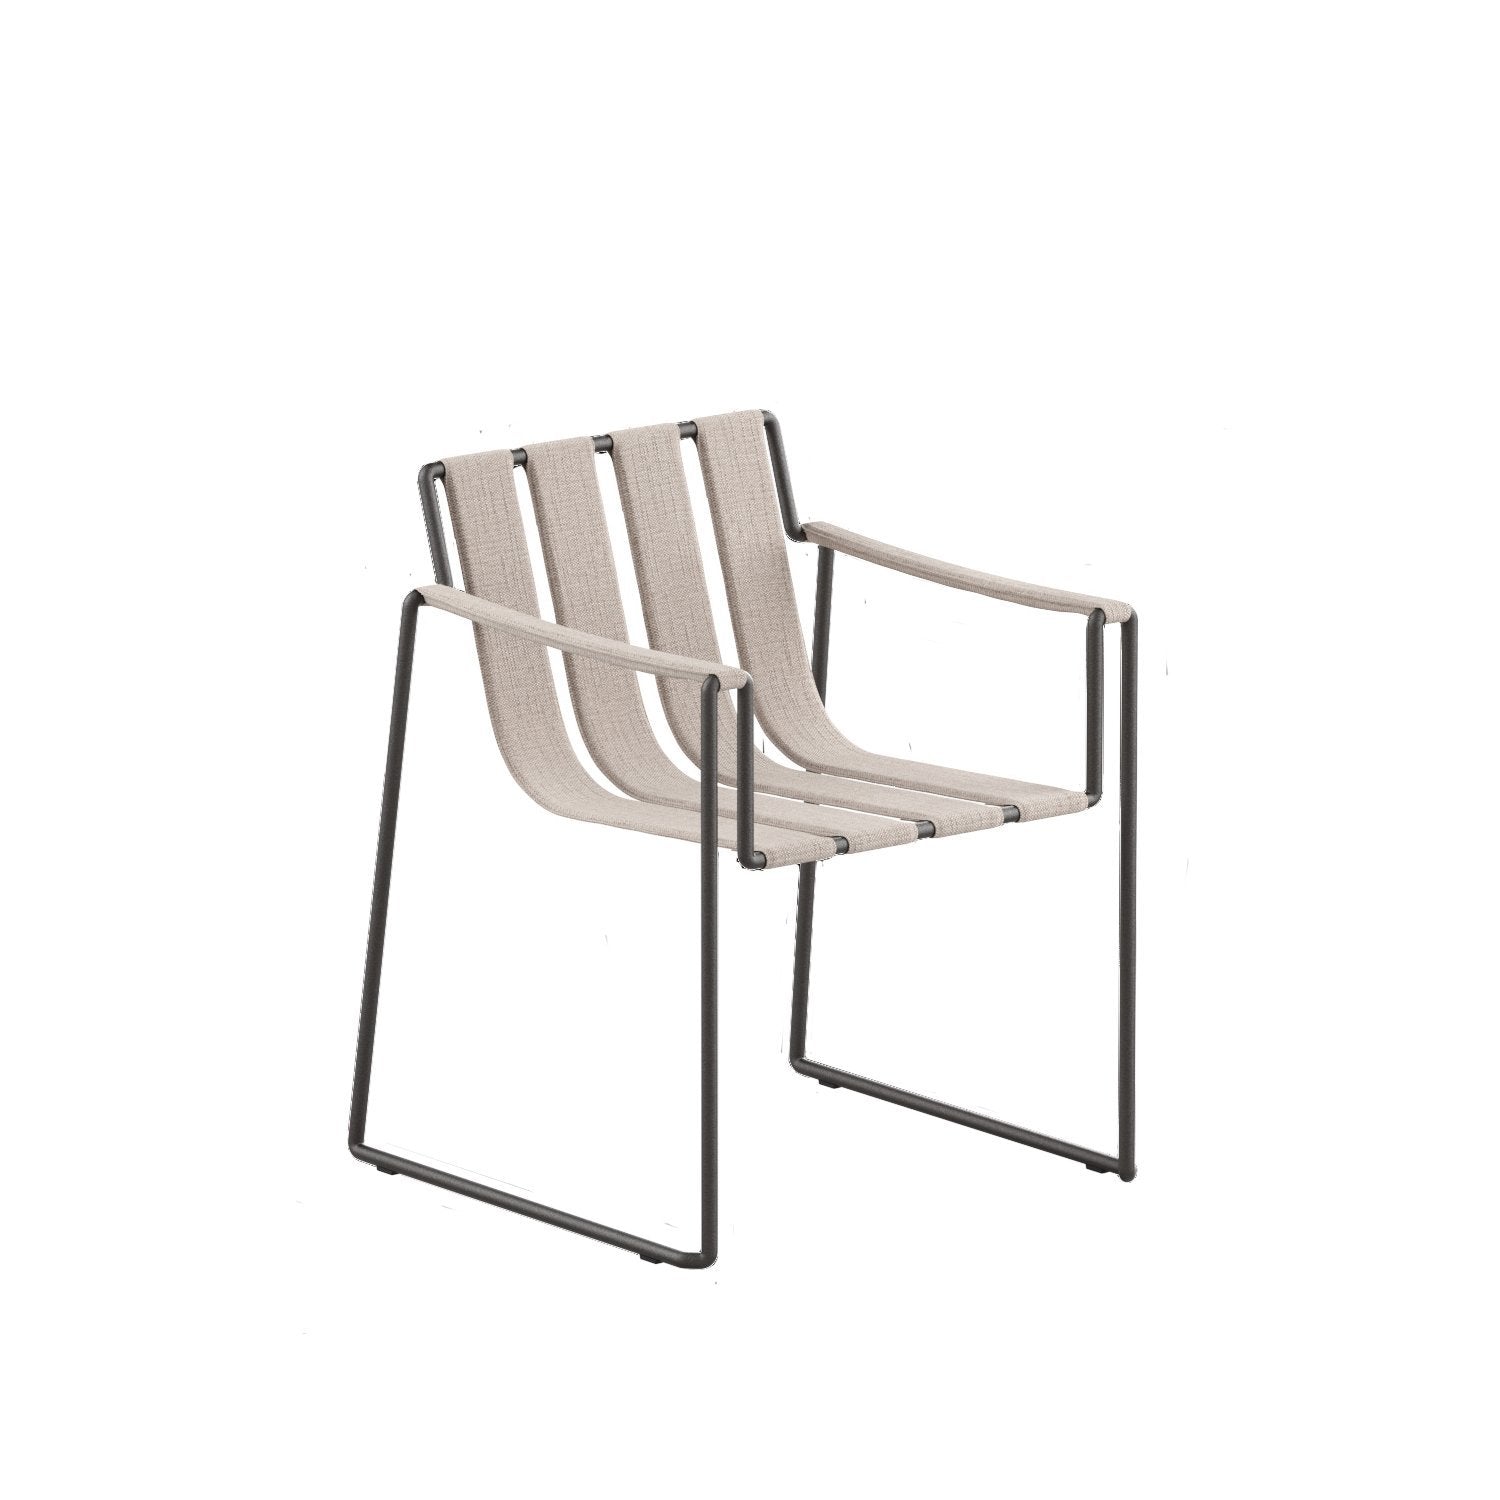 Strappy 55 chair